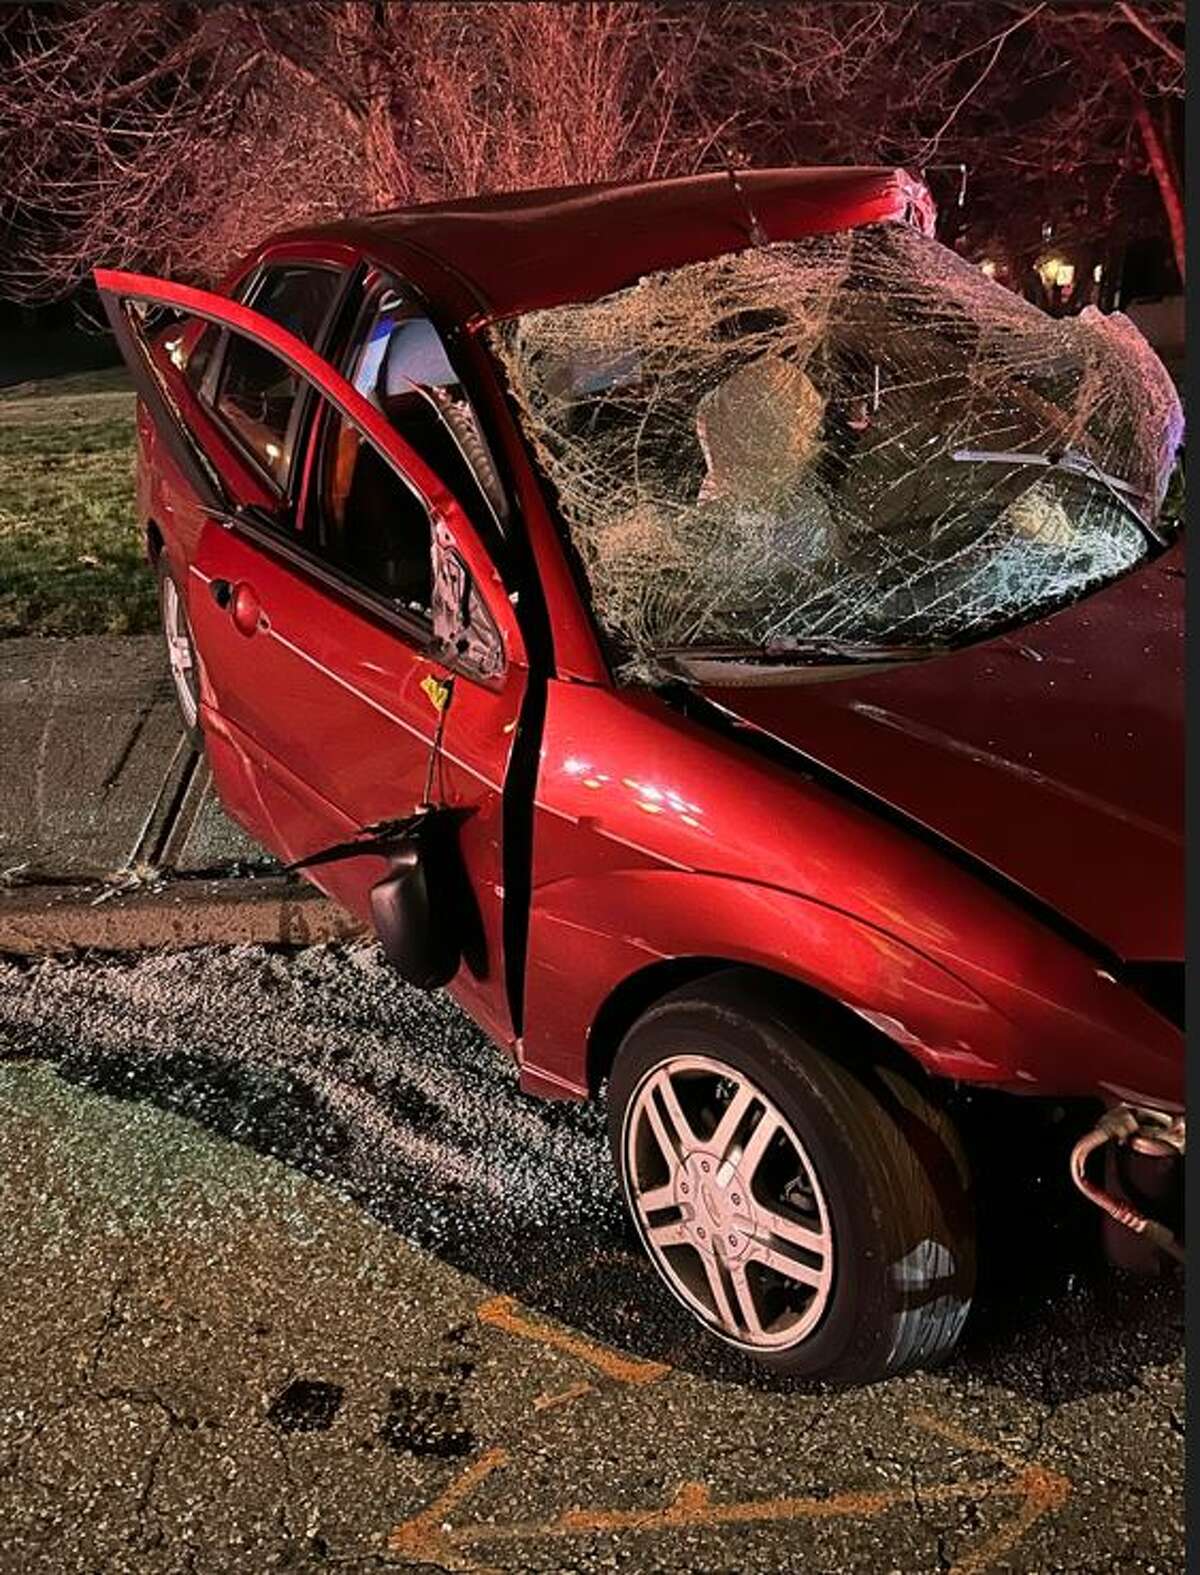 A 21-year-old man was seriously injured Monday night when the car he was driving hit a pole in Willimantic, a fire official says.  